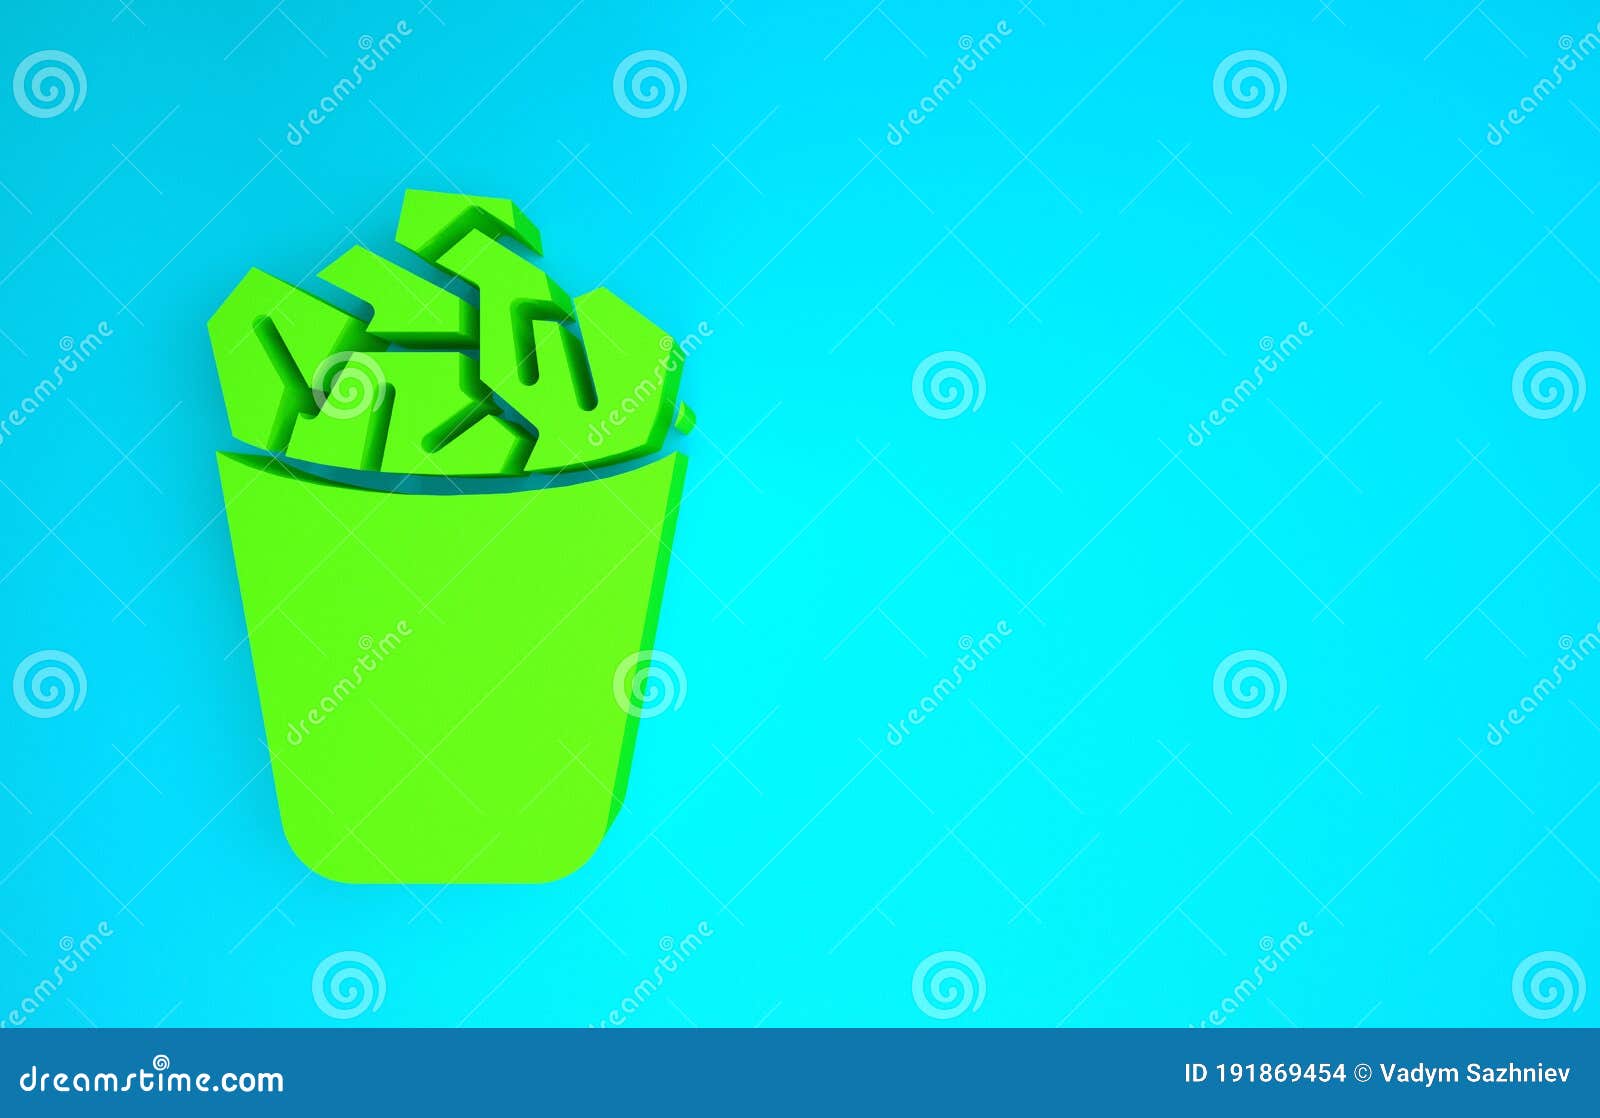 Green Full Trash Can Icon Isolated on Blue Background. Garbage Bin Sign ...